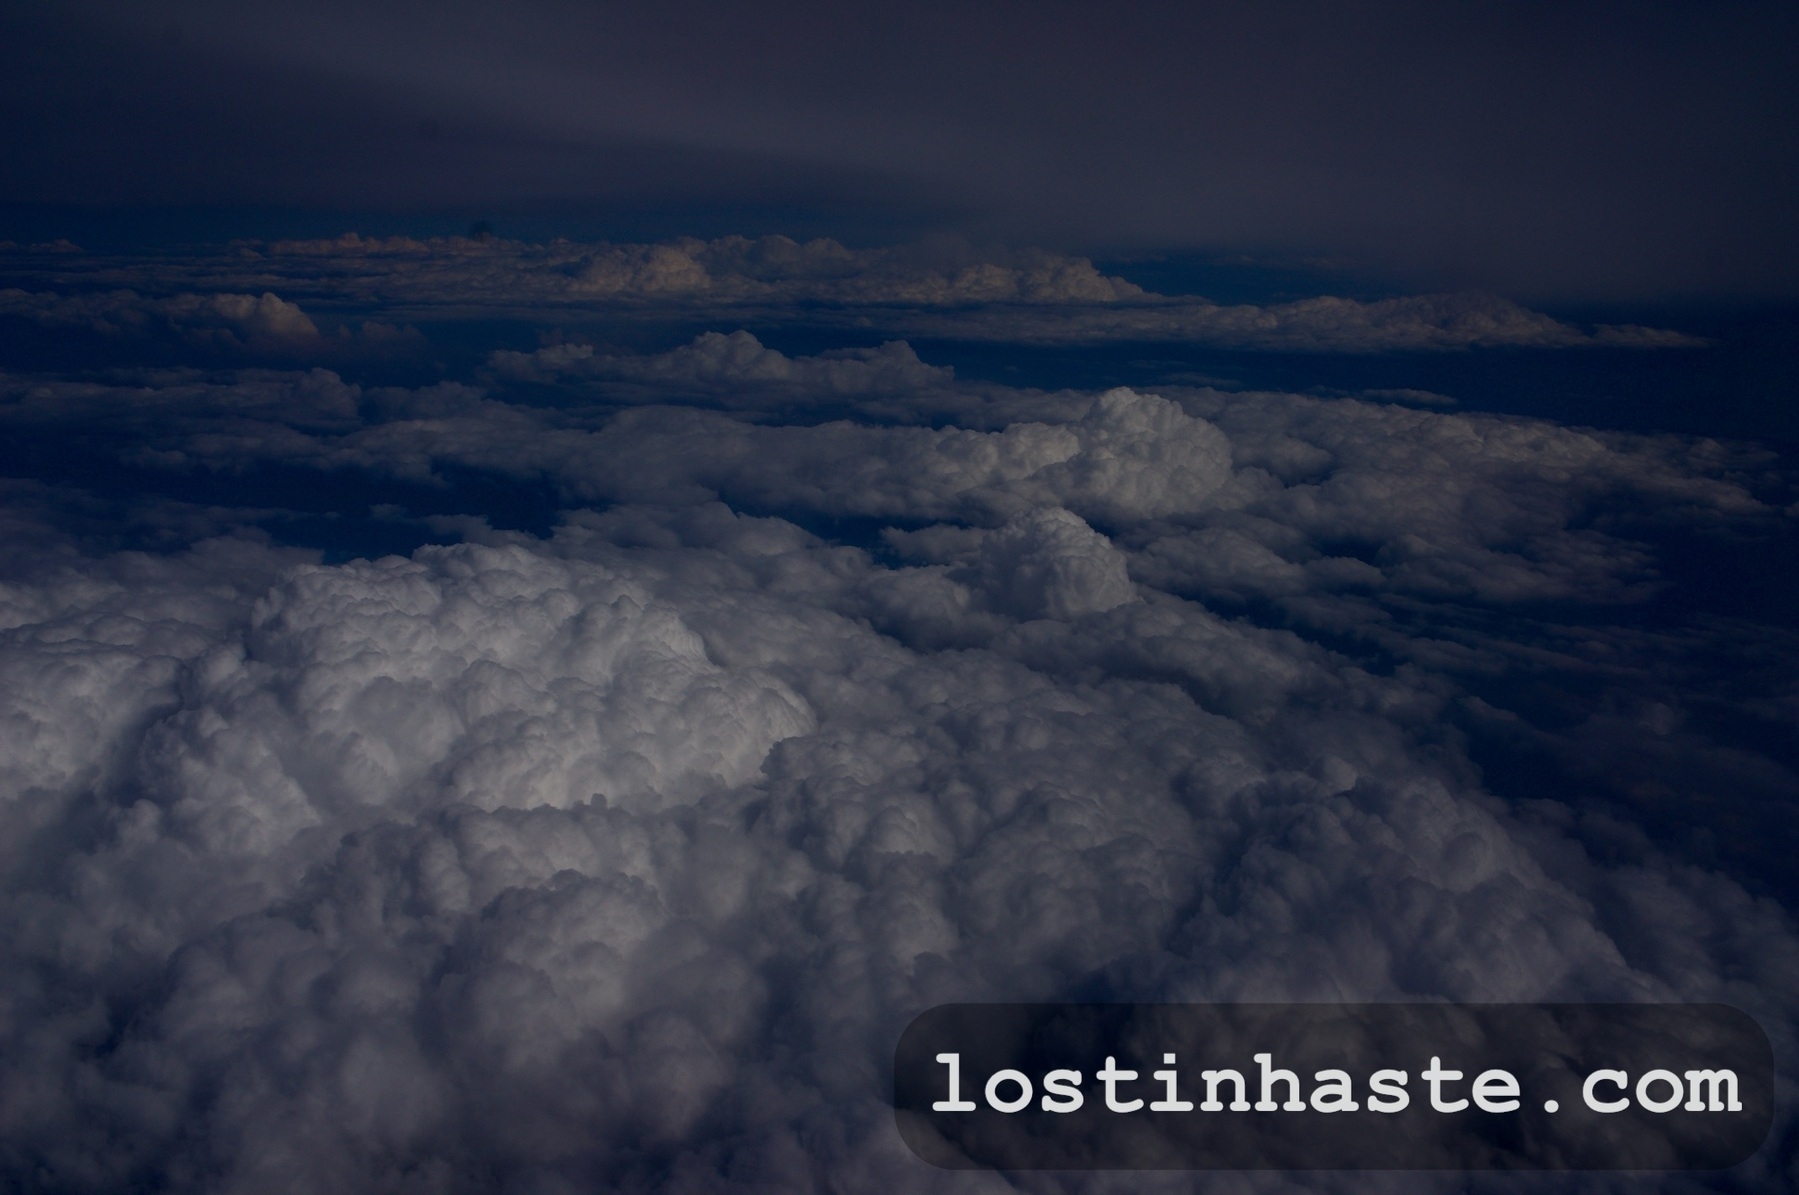 Billowing clouds dominate the view against a dark, moody sky. The website 'lostinthehaste.com' overlays at the bottom.